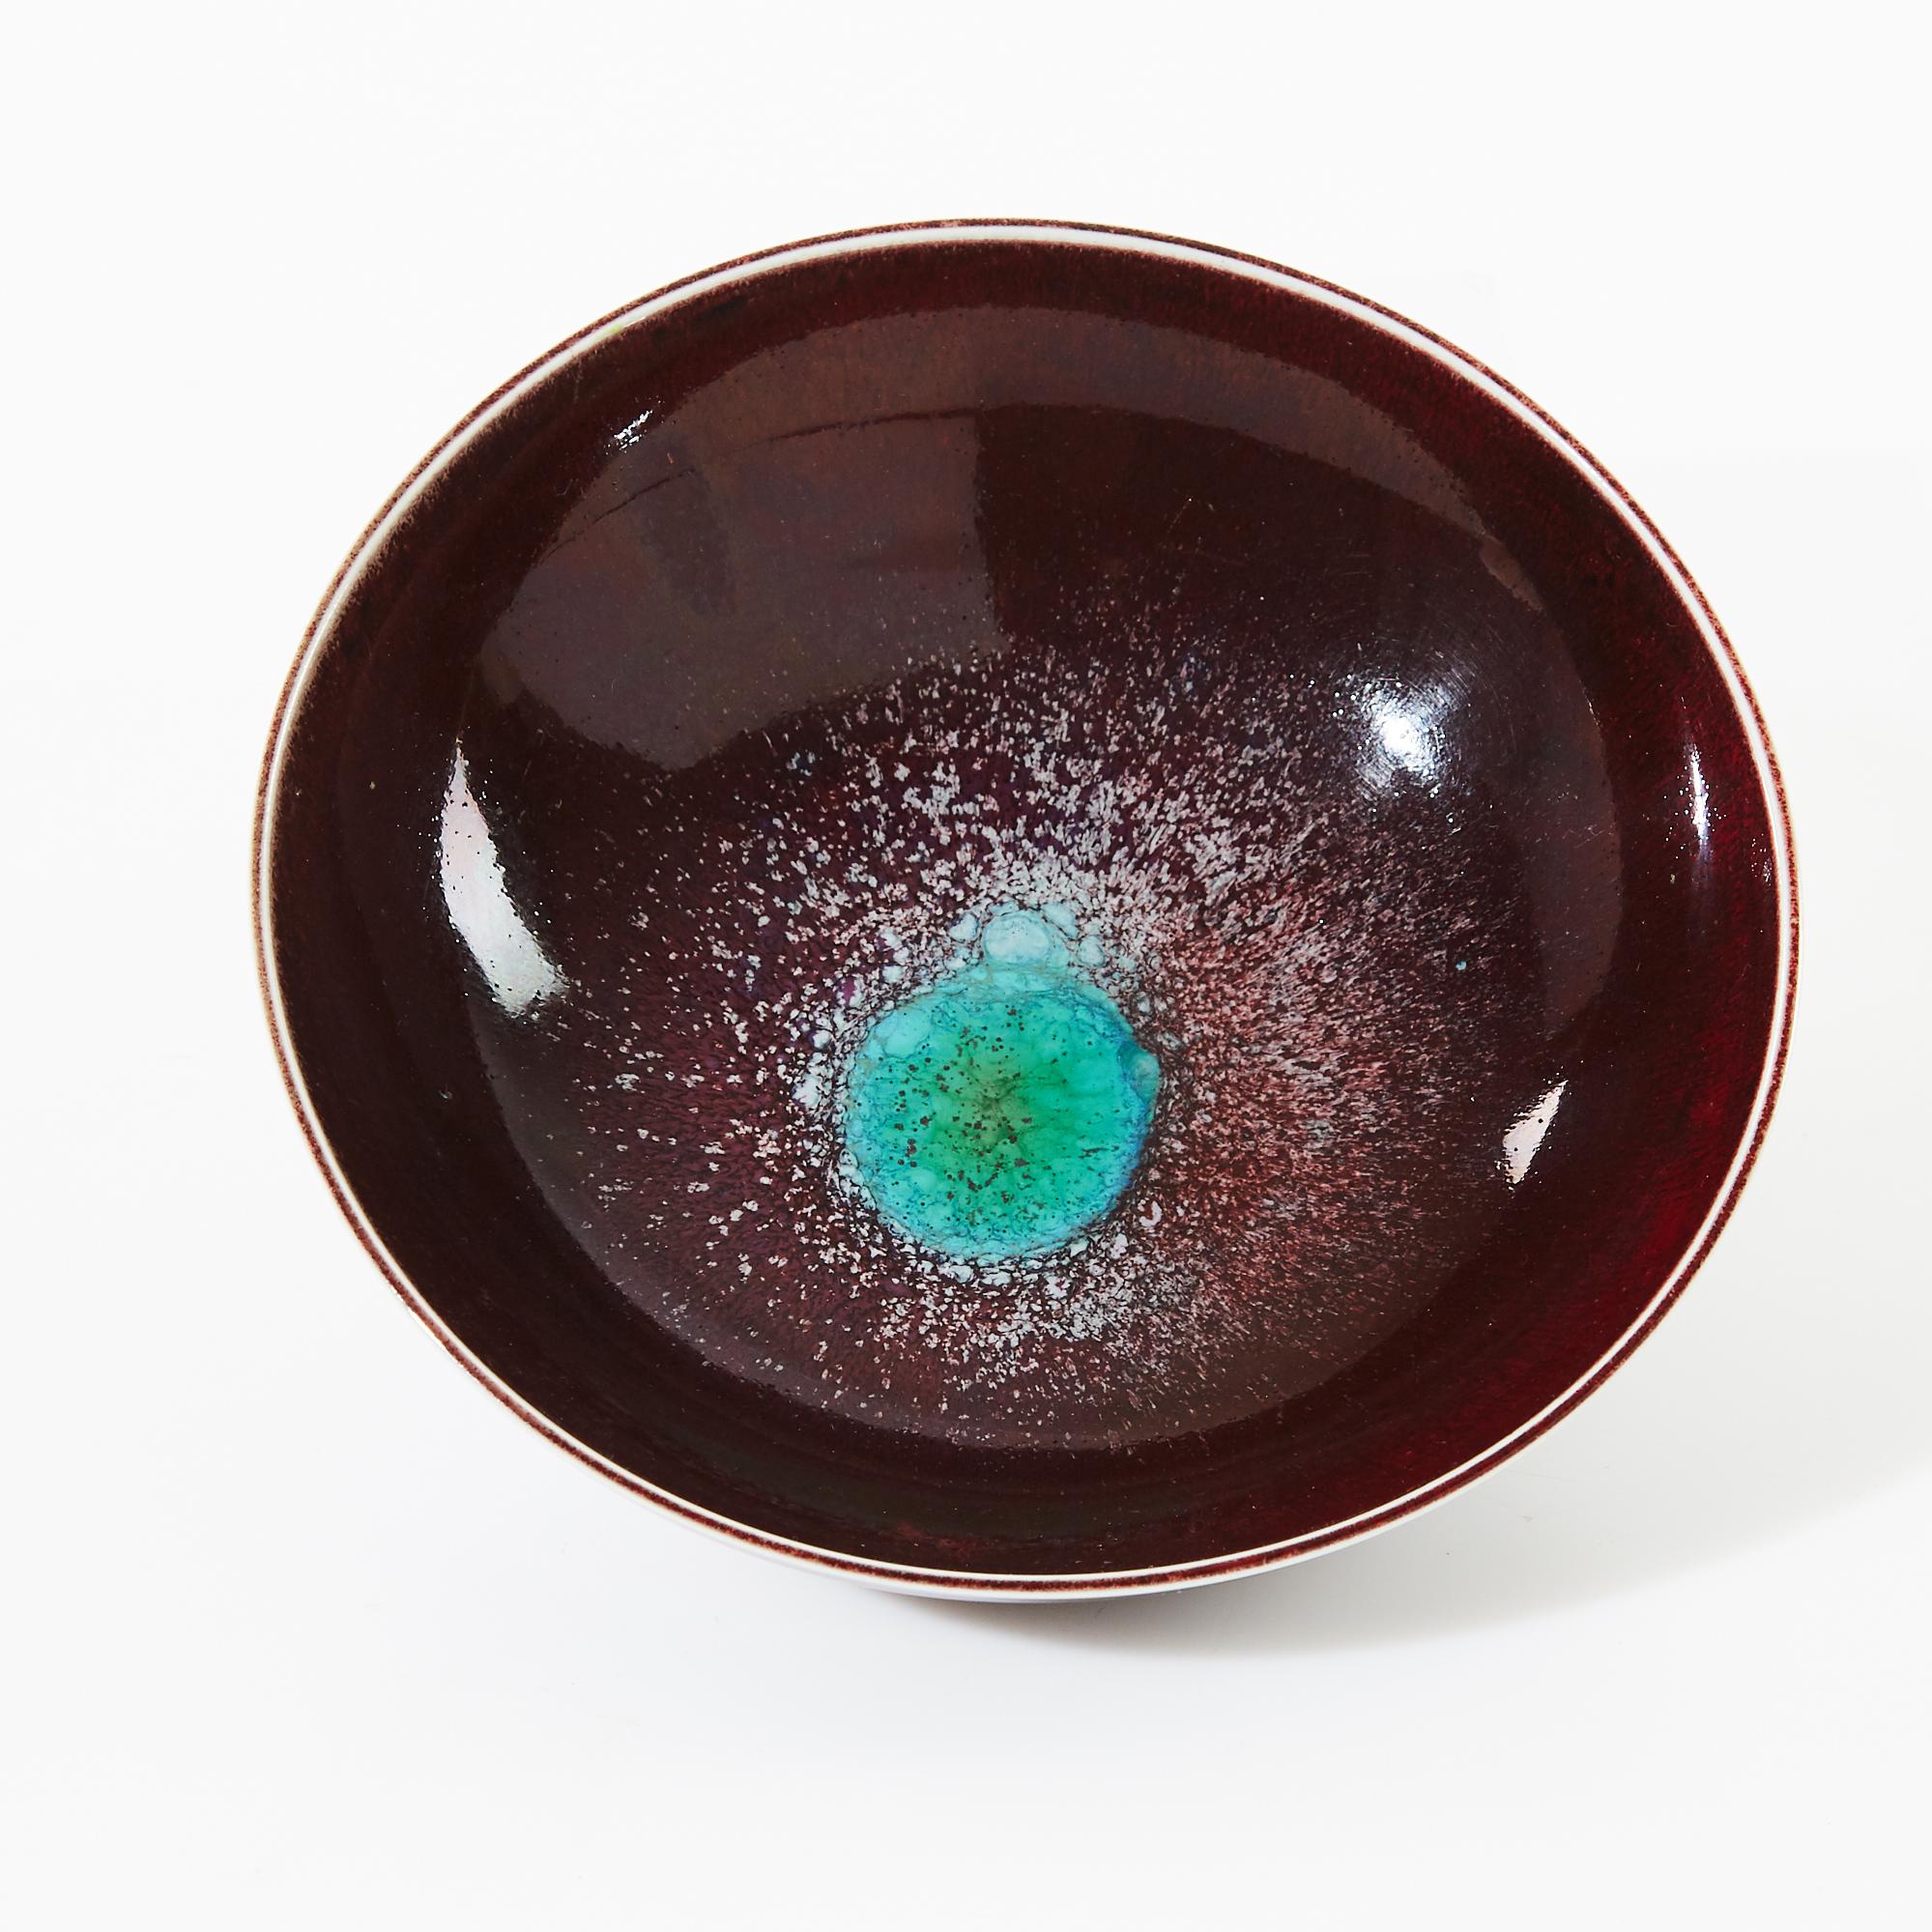 Berndt Friberg (1899-1981) ceramic bowl or vide poches, modern Swedish design for Gustavsberg.
Unique, handmade.
Amazing glaze in purple nuances and turquoise.
Signed and with incised marks.